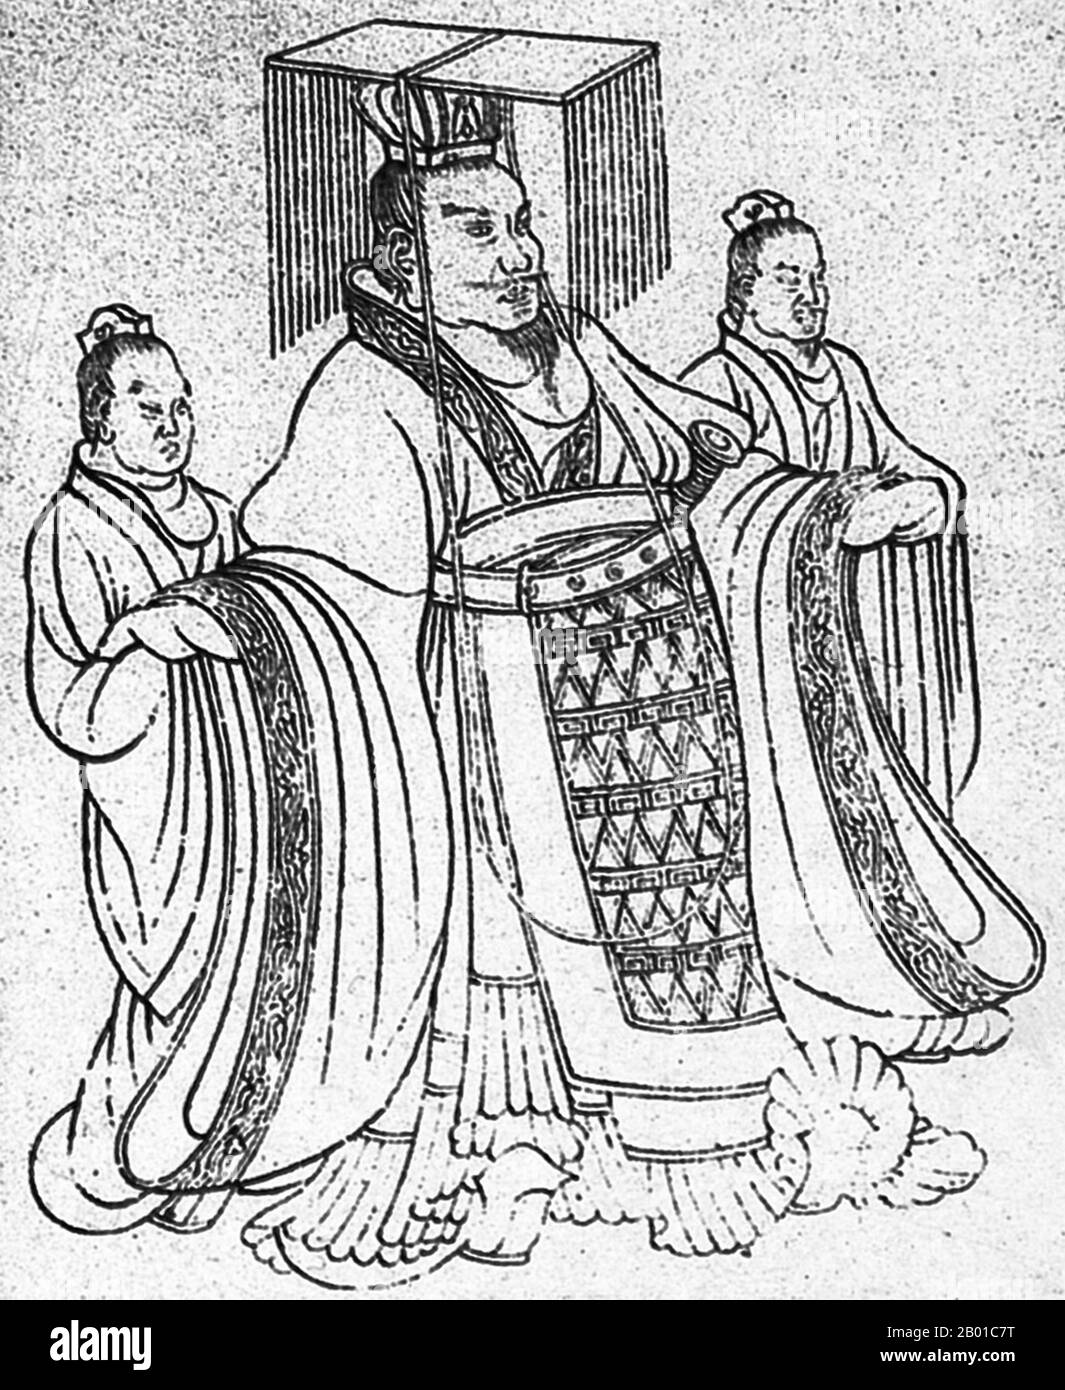 China: Emperor Wu of Han (7 June 156 - 29 March 87 BCE) with attendants. Illustration, c. 1st century BCE.  Emperor Wu of Han (pinyin: Hànwǔdì; Wade–Giles: Wu Ti), personal name Liu Che and courtesy name Tong, was the seventh emperor of the Han Dynasty of China, ruling from 141 to 87 BCE. Emperor Wu is best remembered for the vast territorial expansion that occurred under his reign, as well as the strong and centralised Confucian state he organised.  He is cited in Chinese history as the greatest emperor of the Han dynasty and one of the greatest emperors in Chinese history. Stock Photo